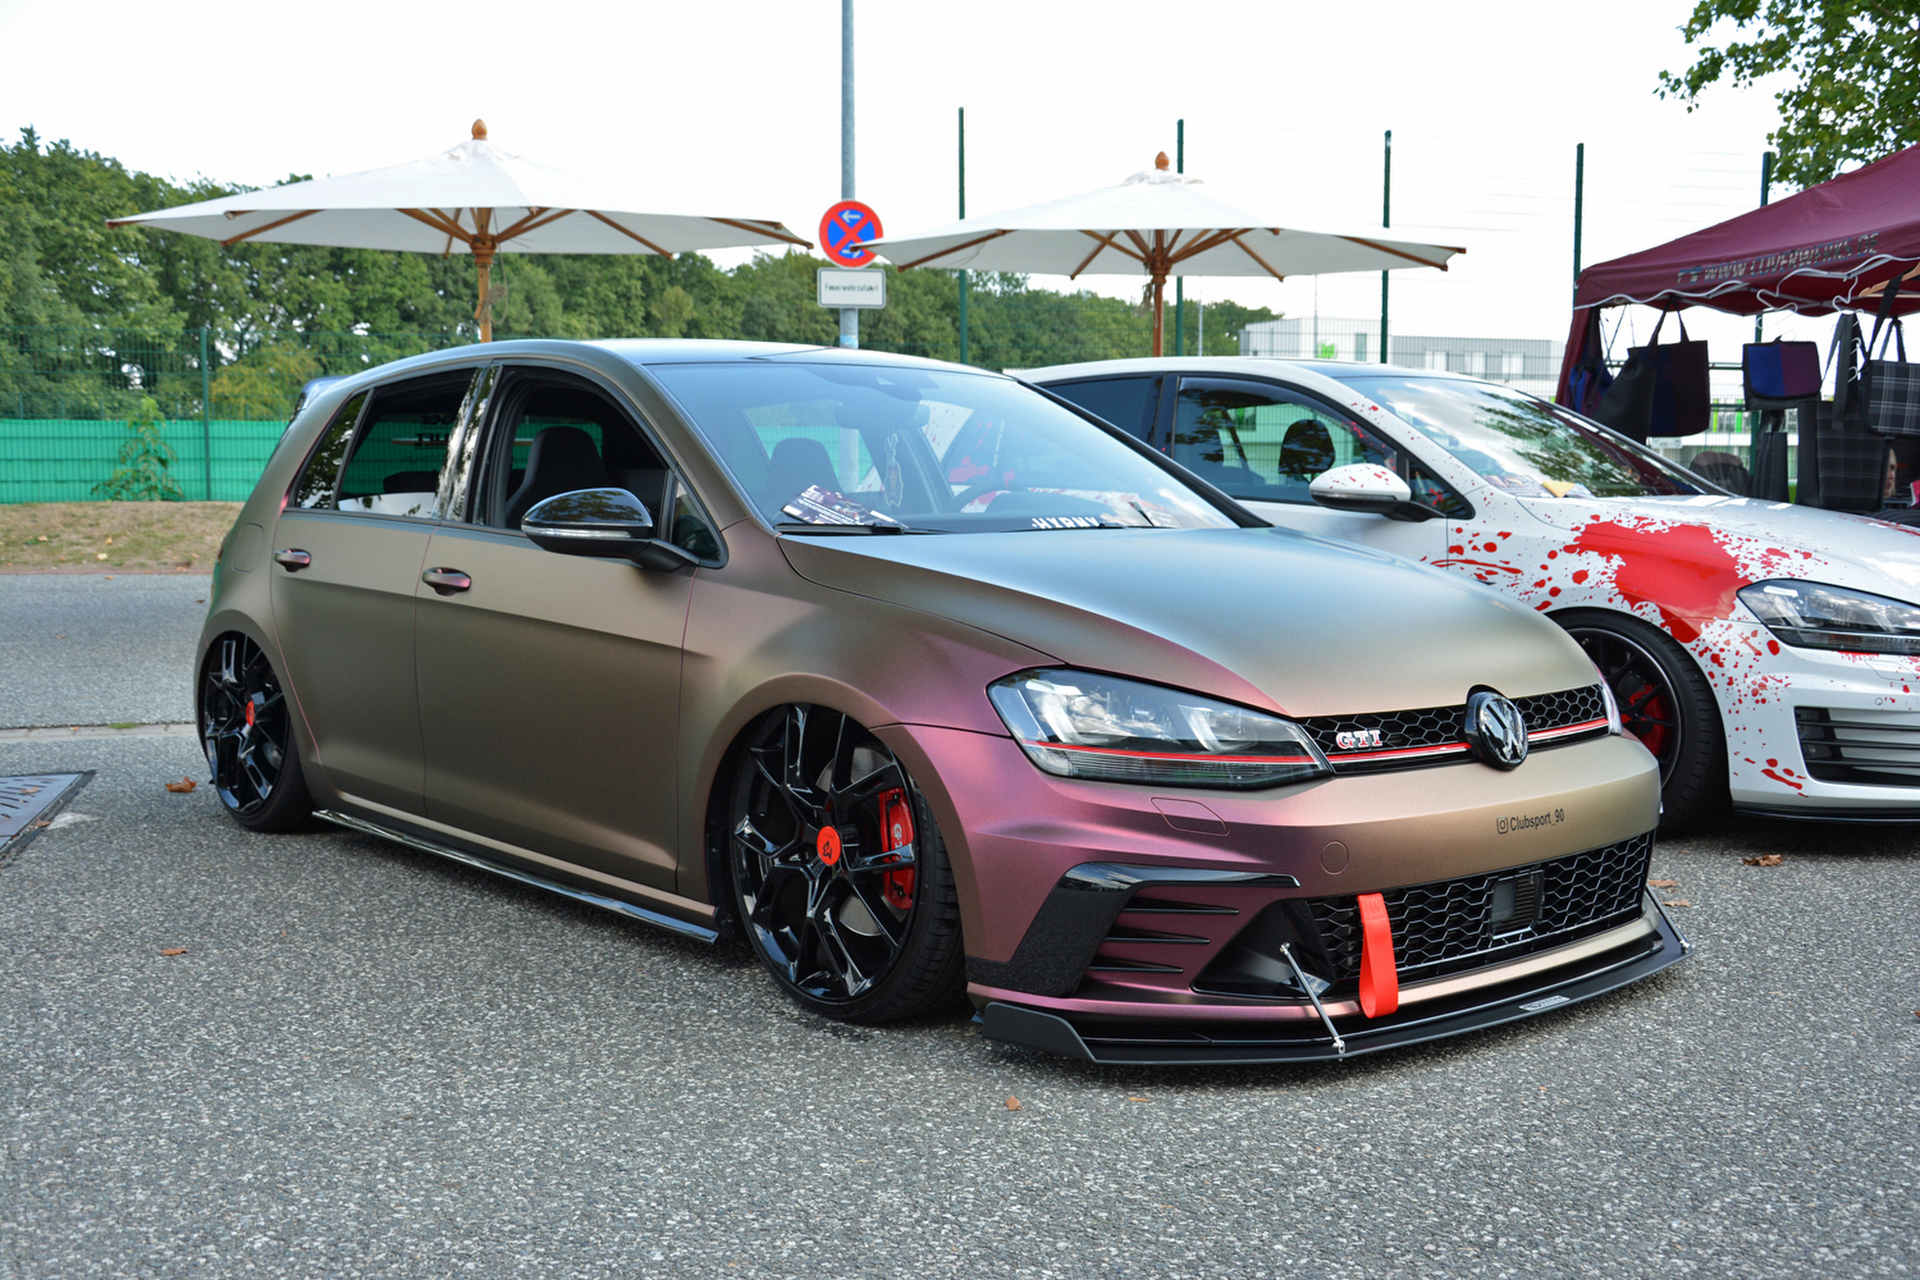 The Best Tuner Cars for 2019  Modified Cars, Performance Cars